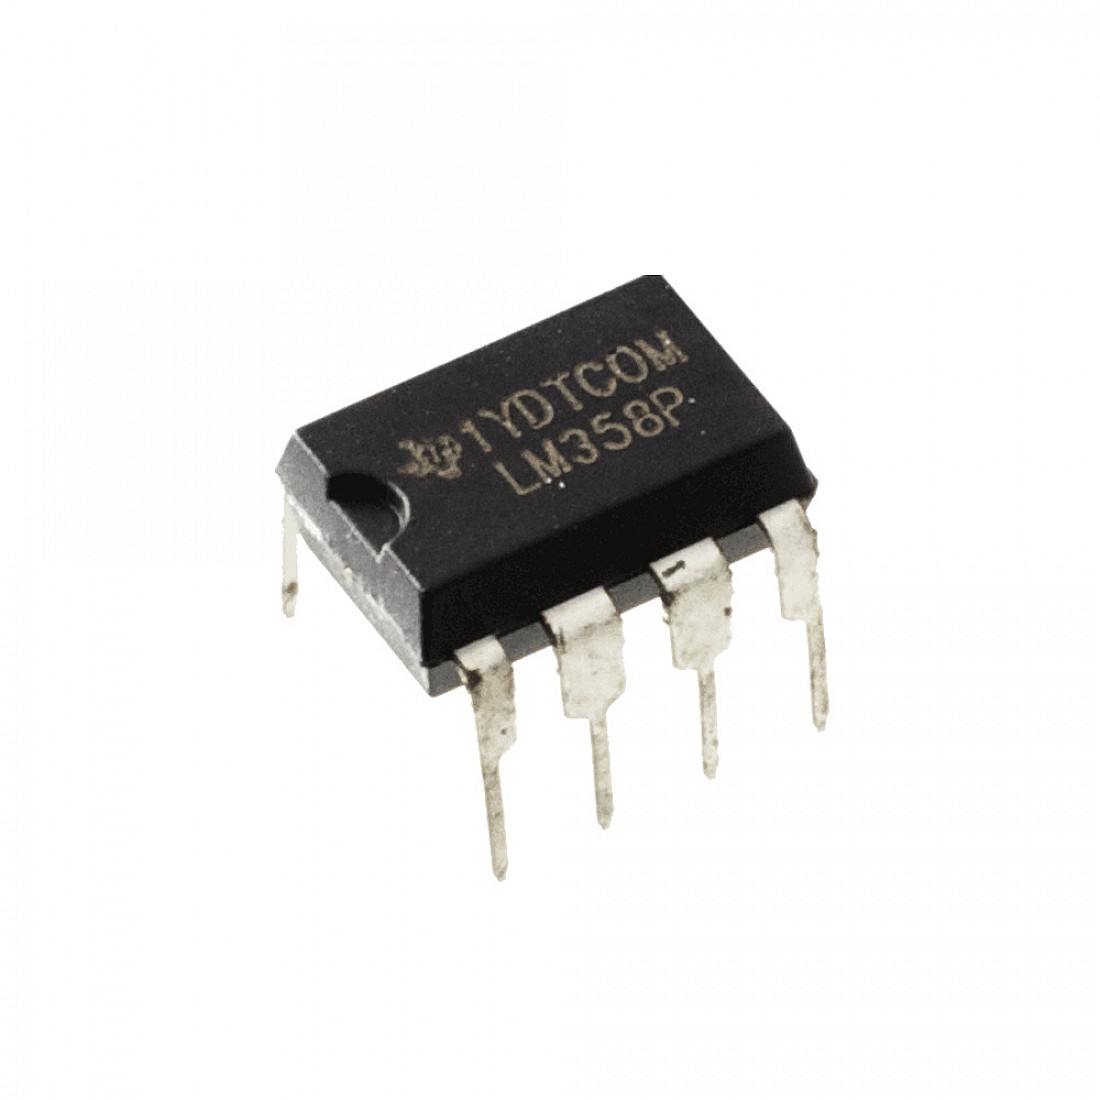 Lm358 Ic Low Power Dual Operational Amplifier Op Amp Ic Other 5607